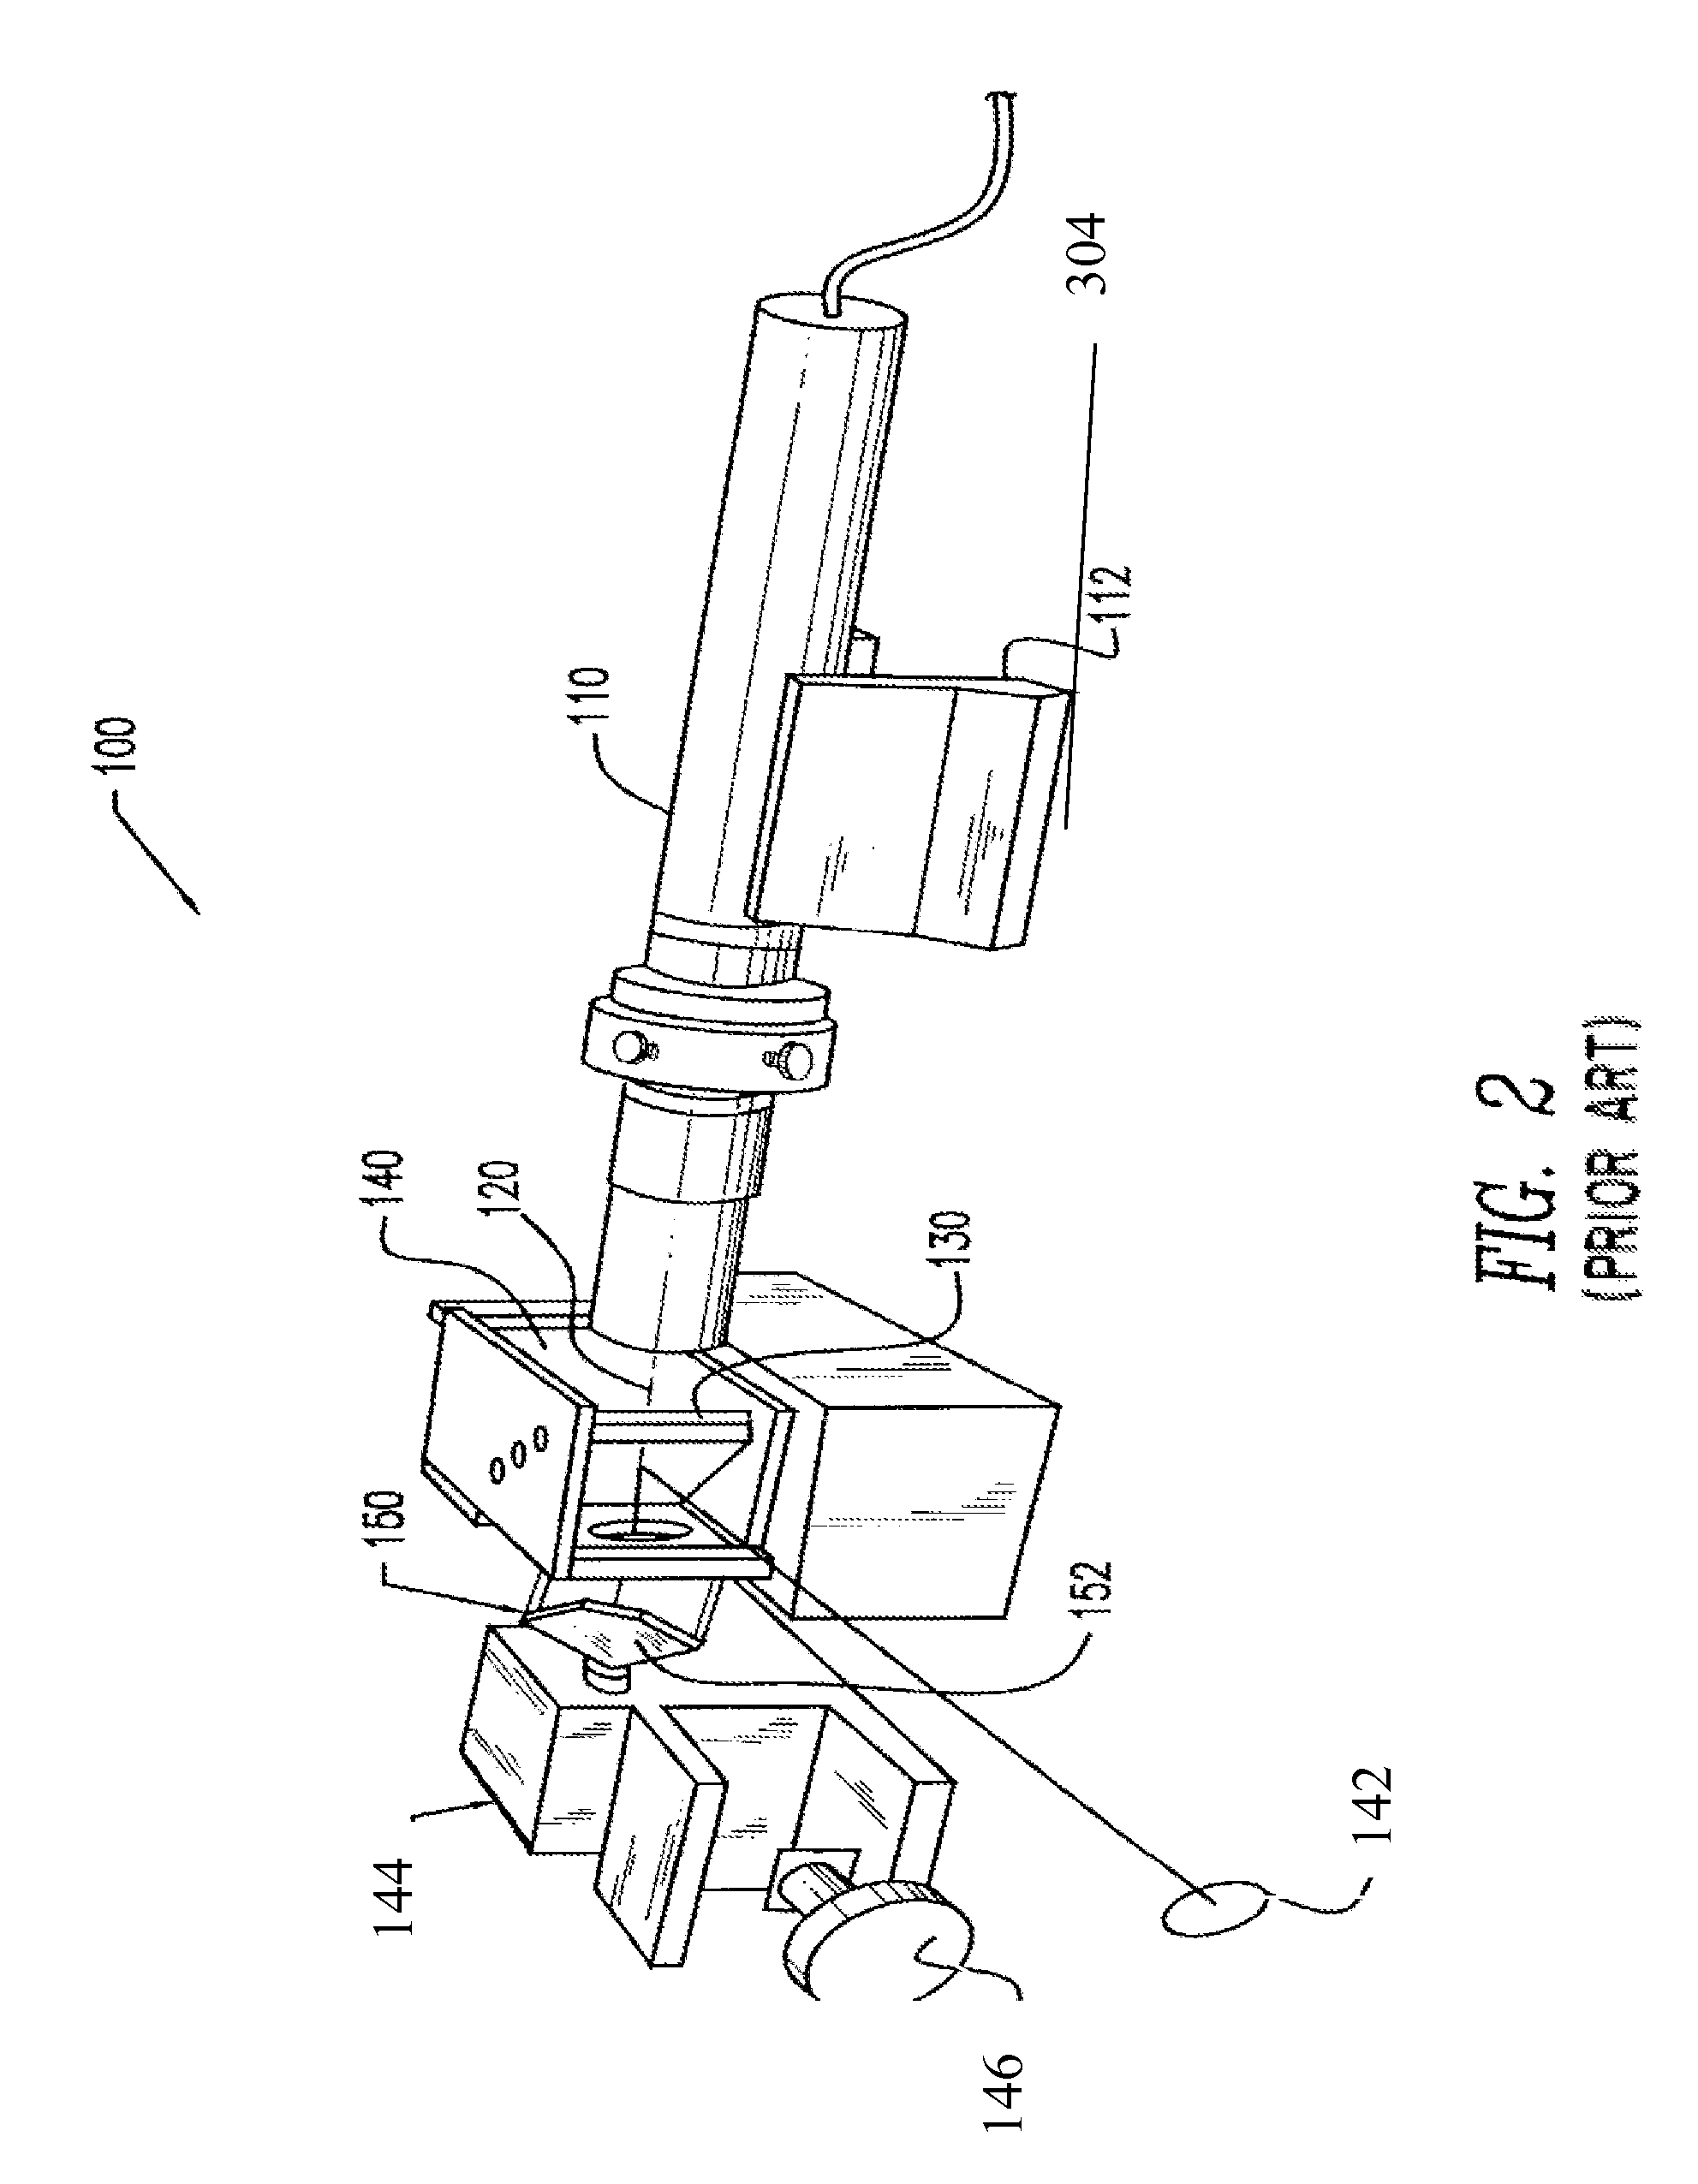 Flexure mount for an optical assembly